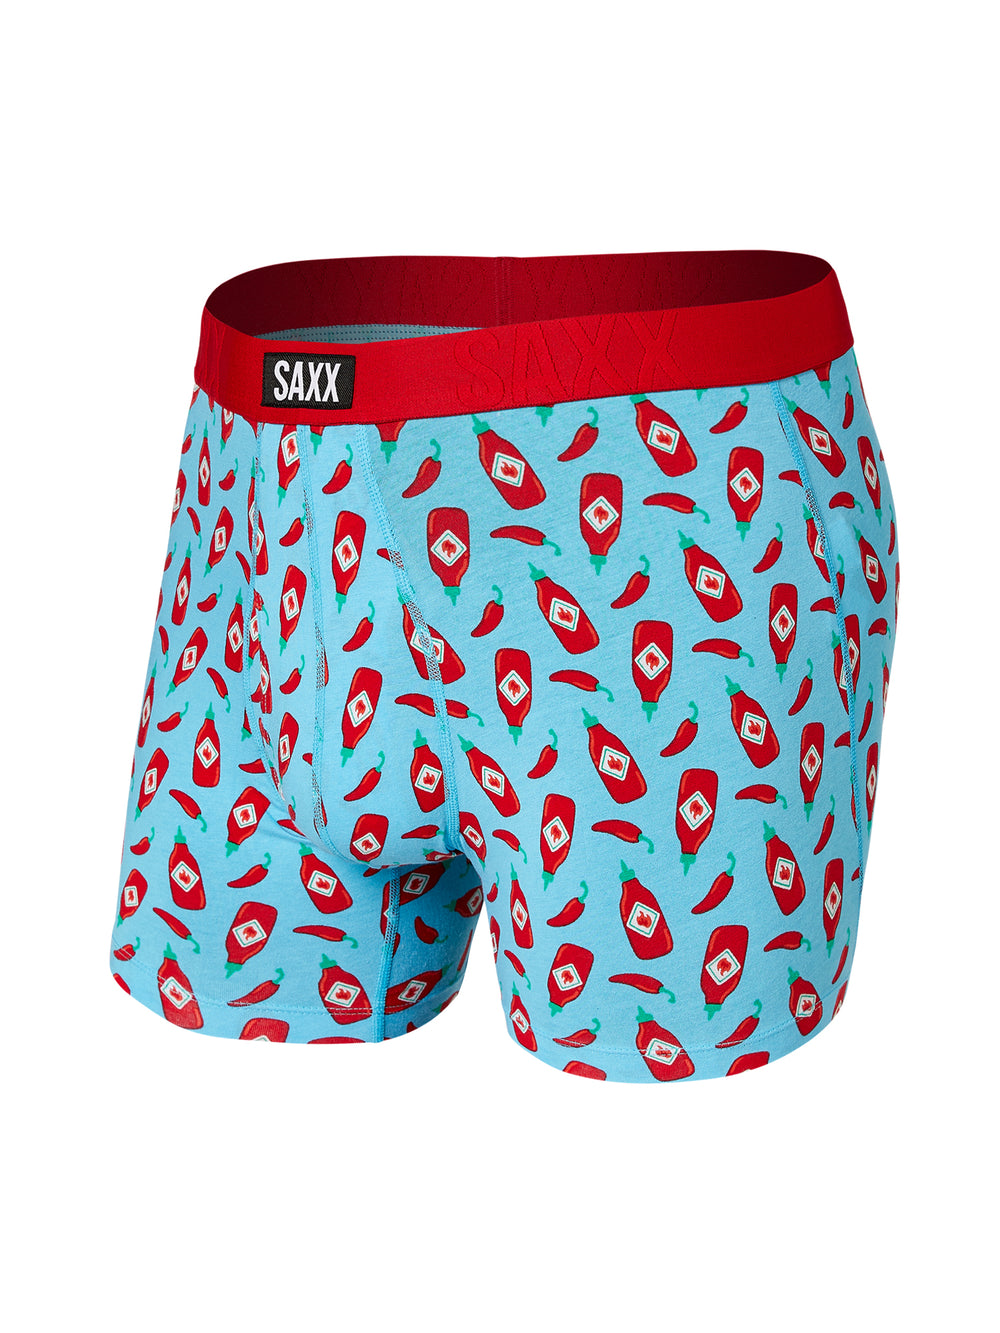 SAXX UNDERCOVER BOXER BRIEFING - MAIN SQUEEZE - CLEARANCE